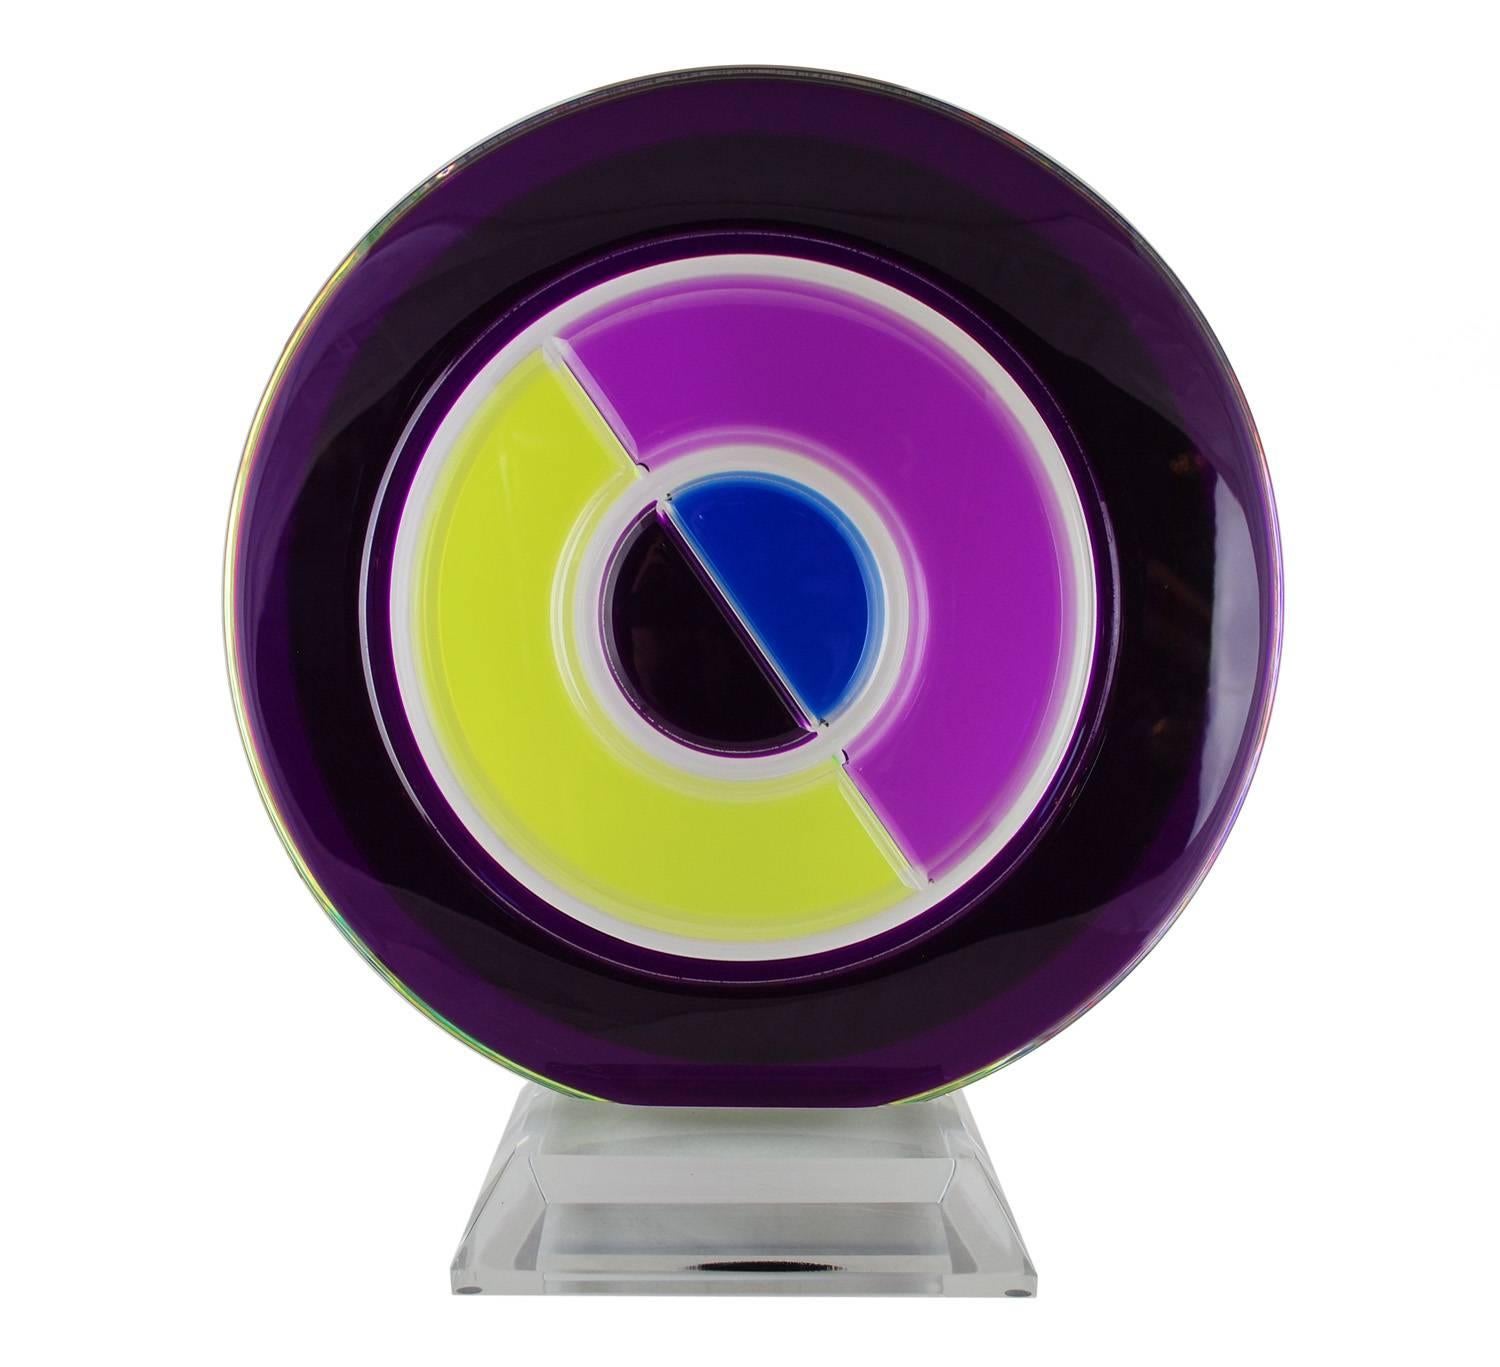 An impressive lucite sculpture by Israeli artist Shlomi Haziza. Crisp, geometric design featuring intense purples, chartreuse and blue on a clear base. Singed by the artist. Elegant modern decorative piece.

Great condition, light scratch on the top